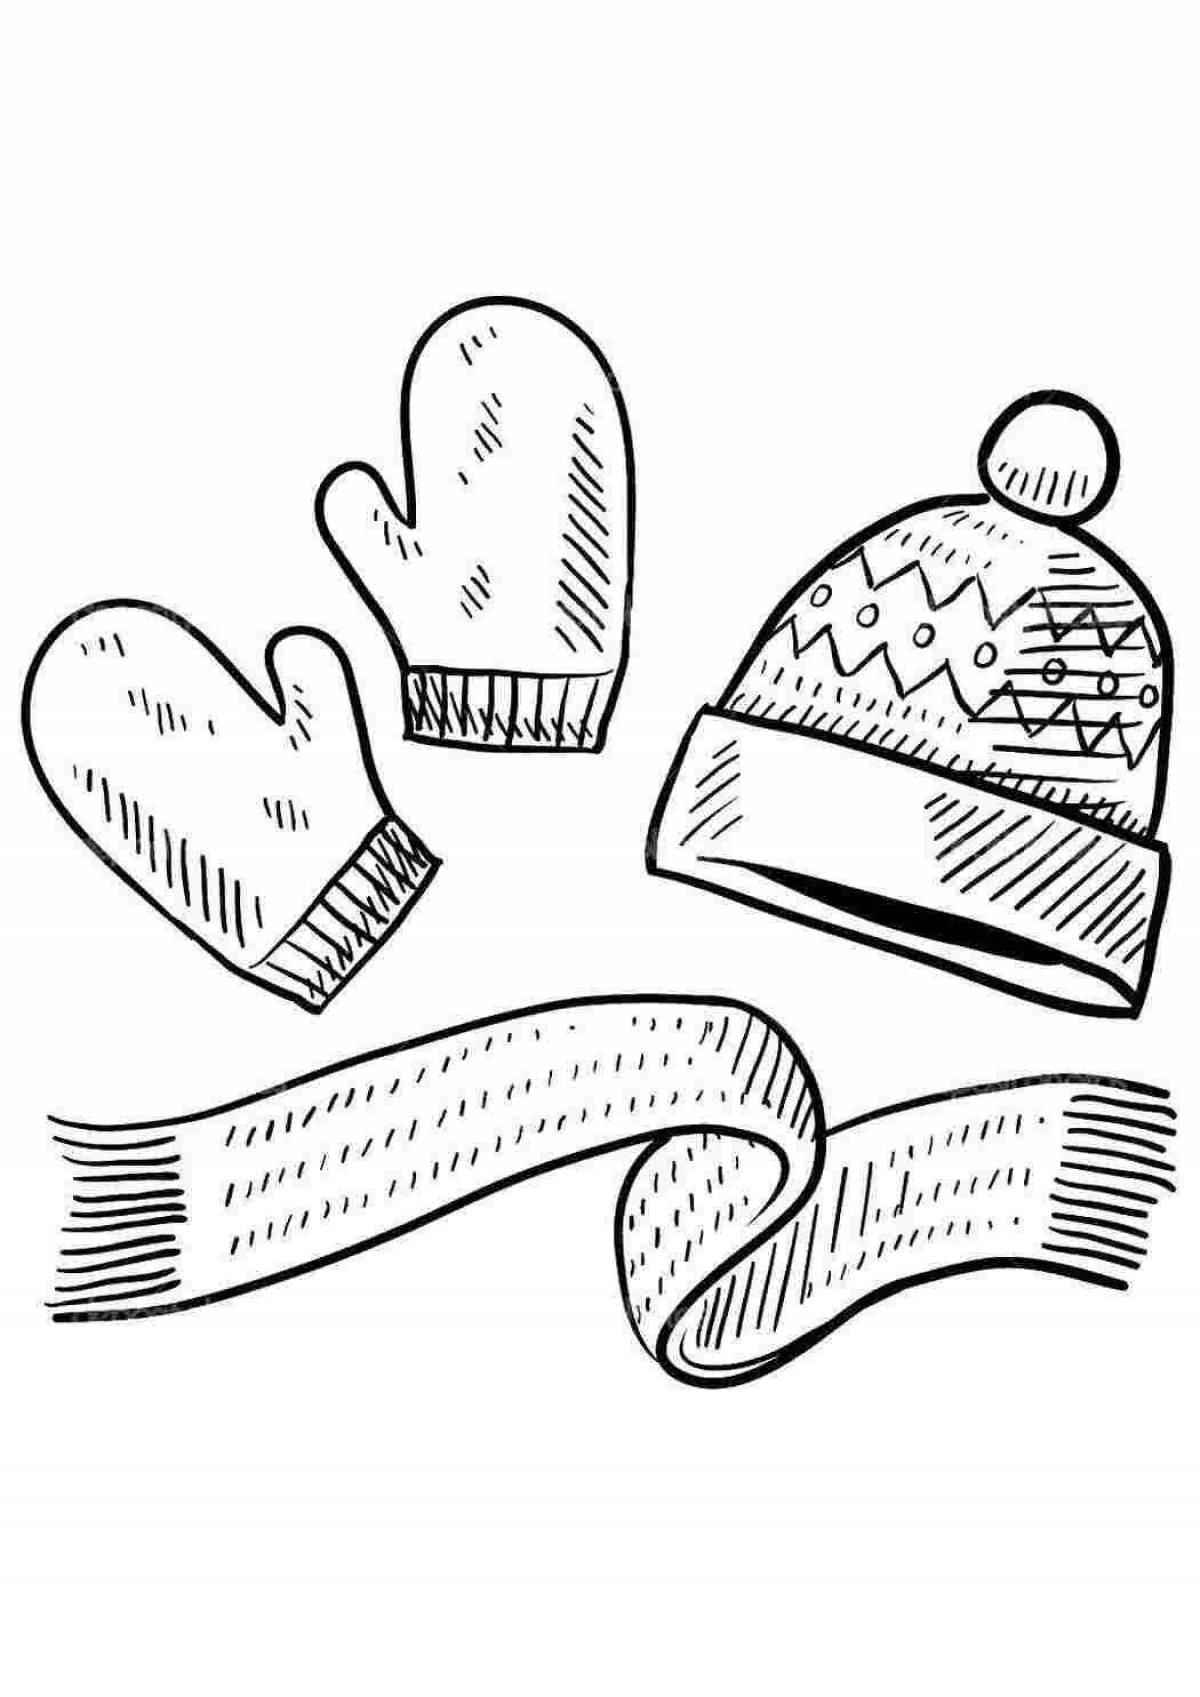 Outstanding hat coloring page for 4-5 year olds